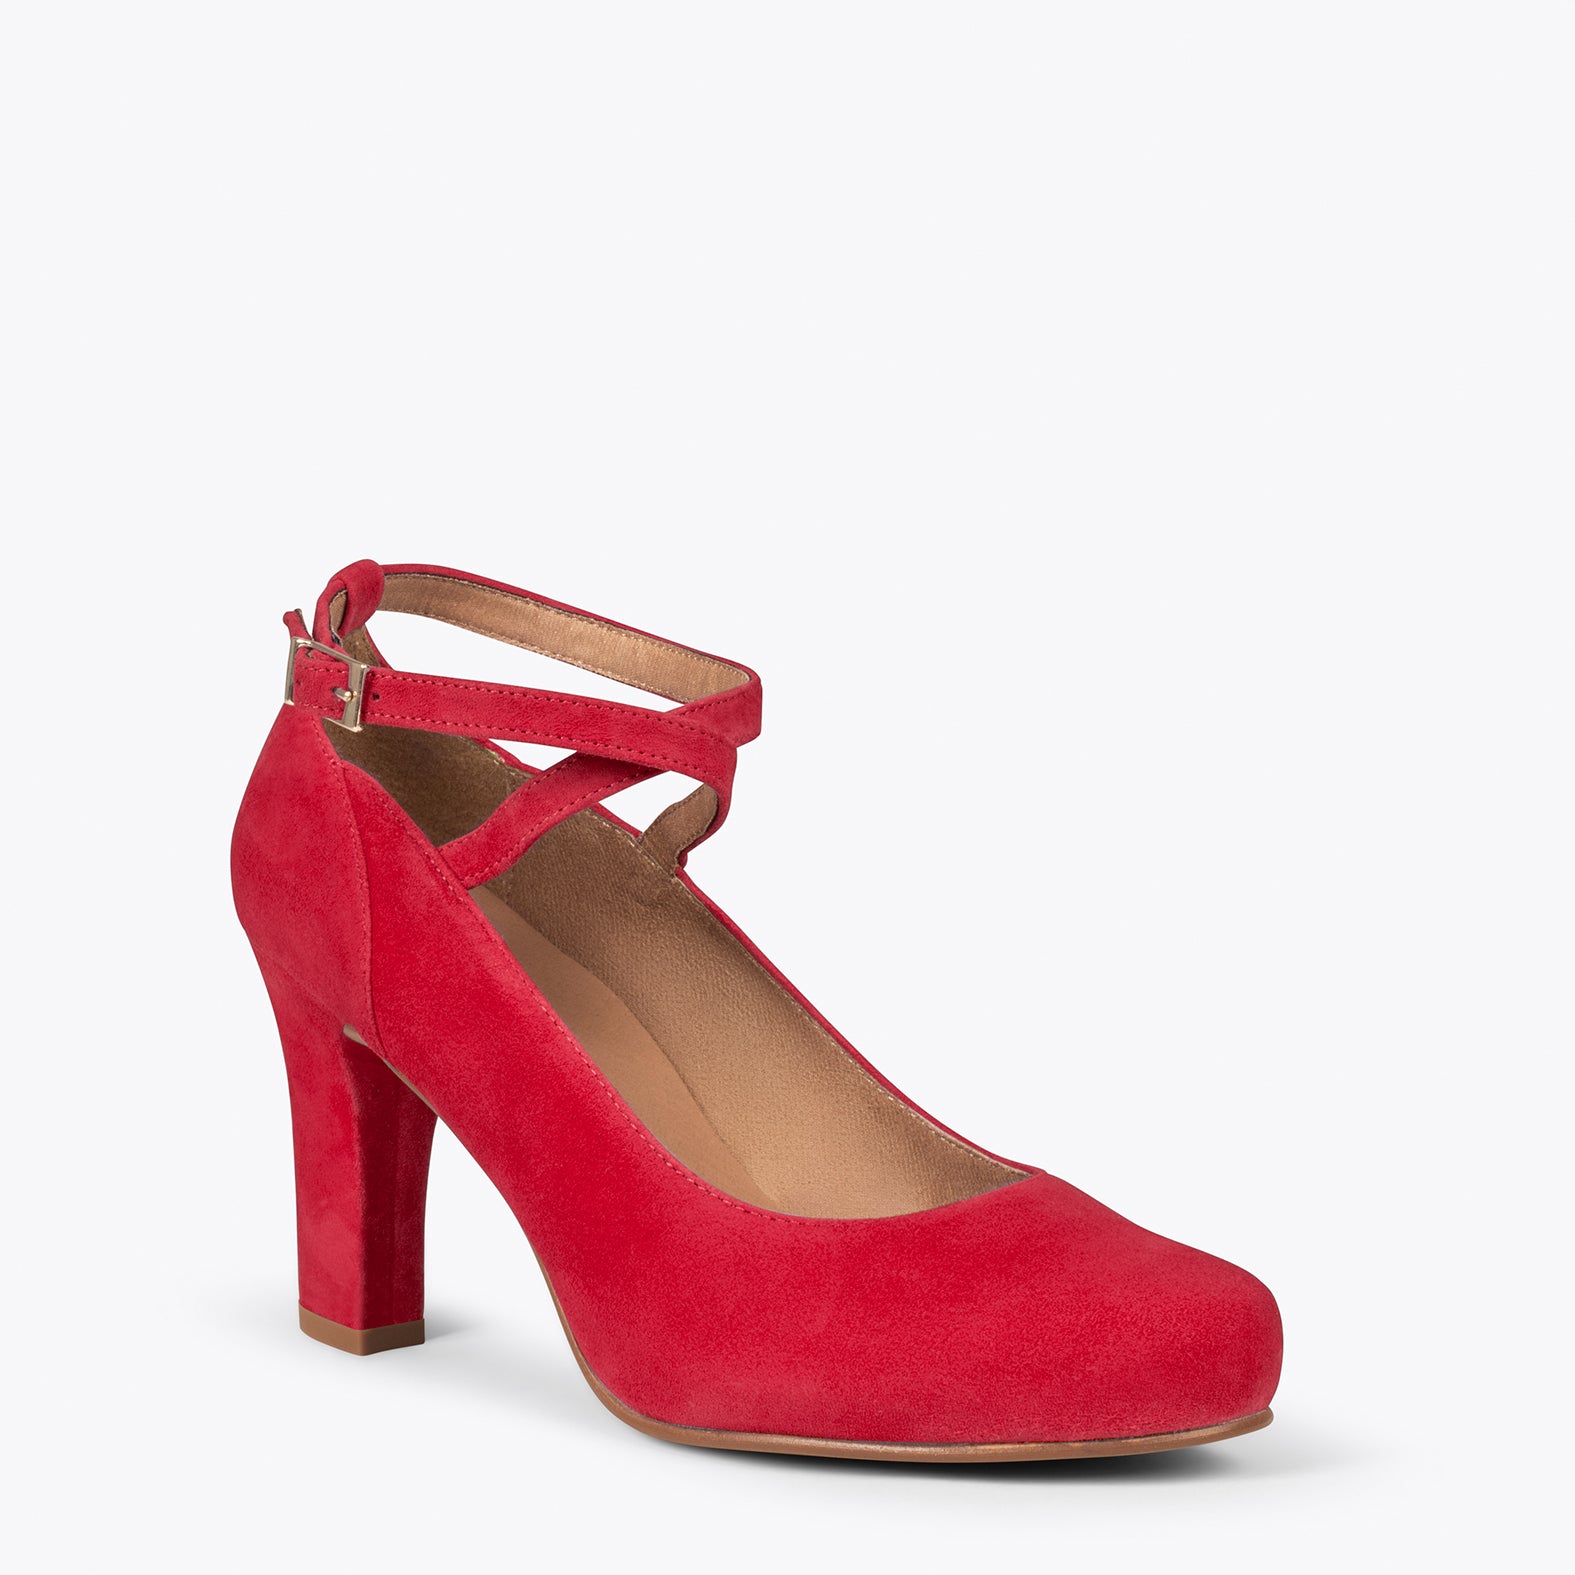 STRAPS – RED high heels with crossed straps